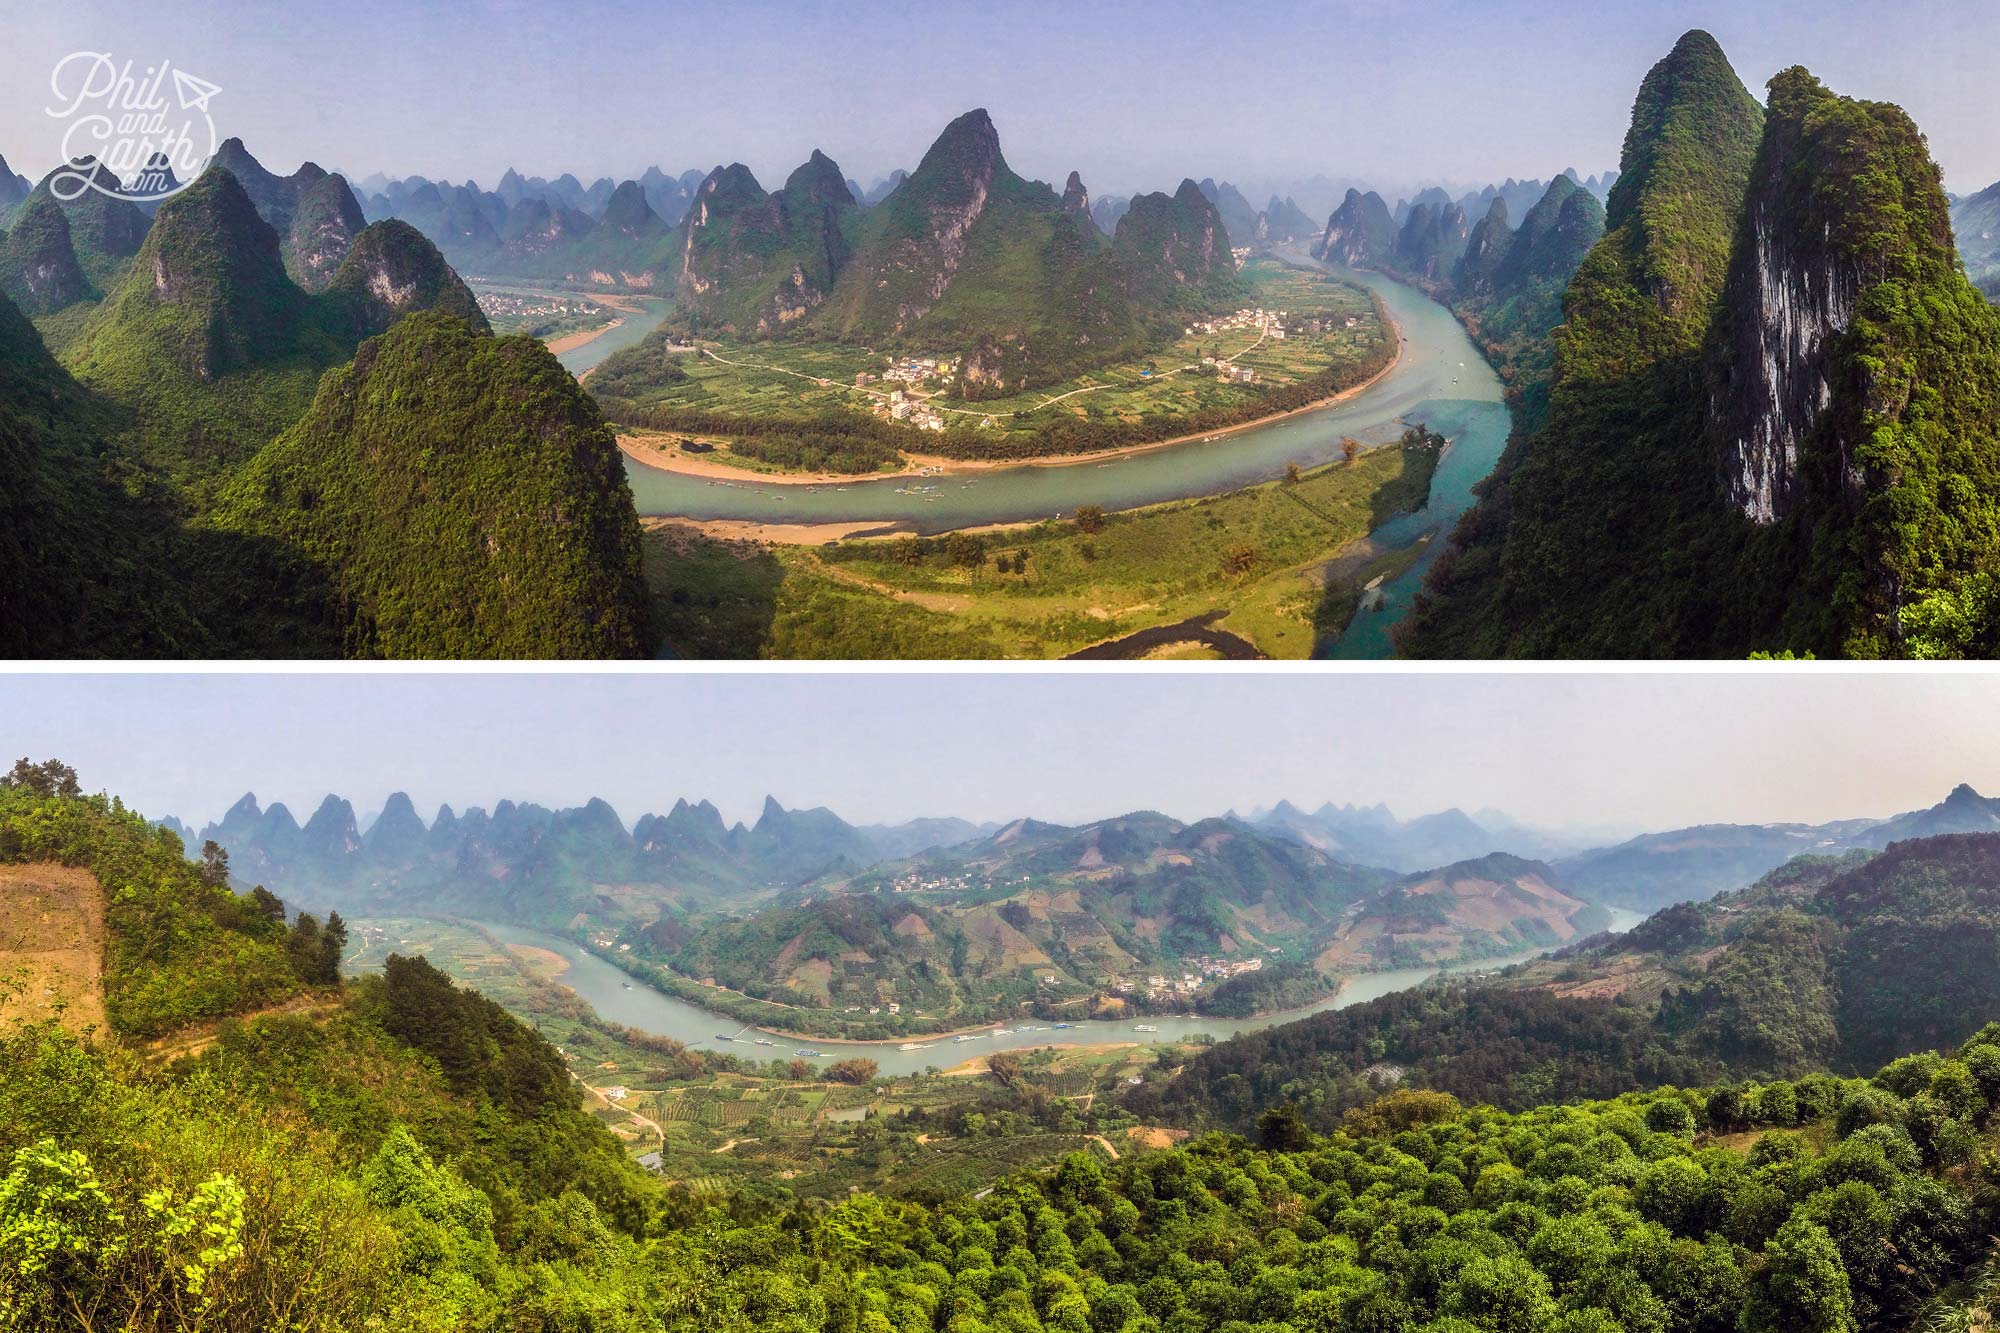 Phil took these incredible panoramic views with his iPhone from the Xiang Gong Shan mountain